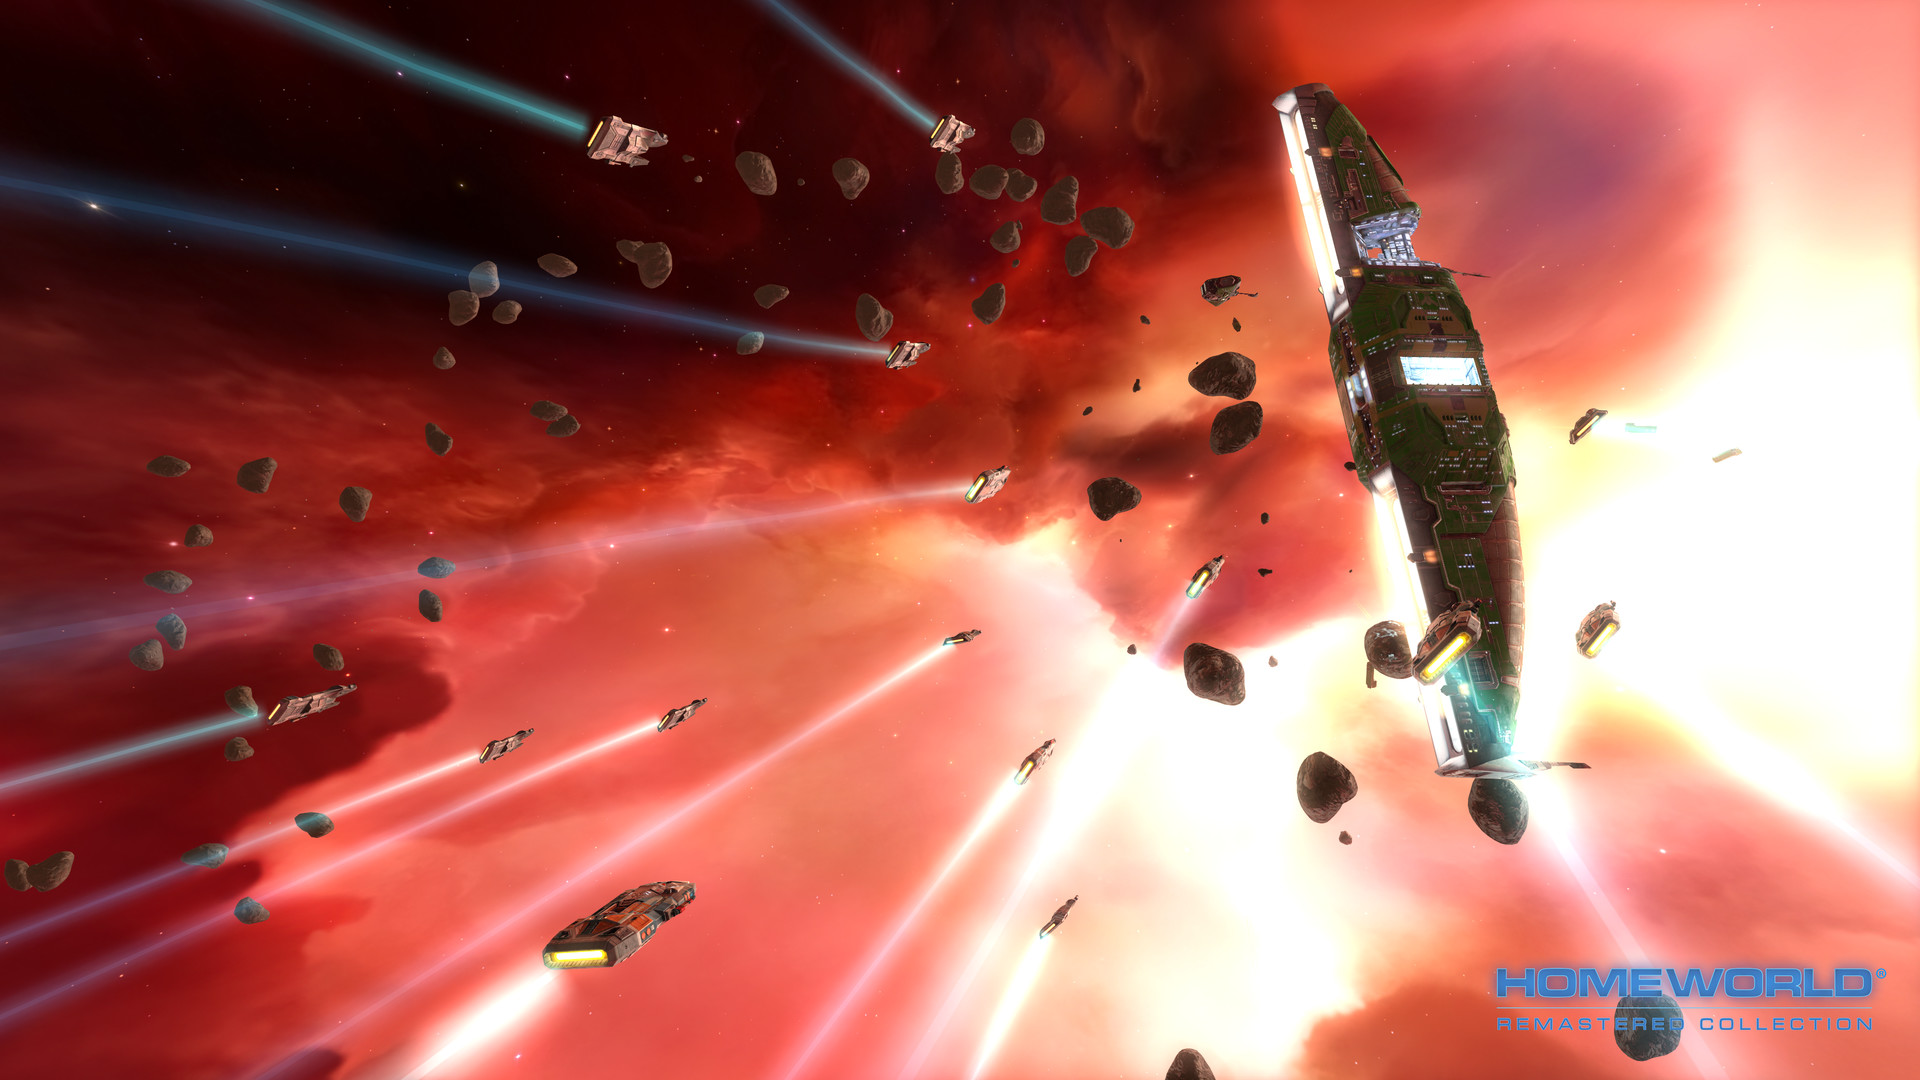 Find the best computers for Homeworld Remastered Collection